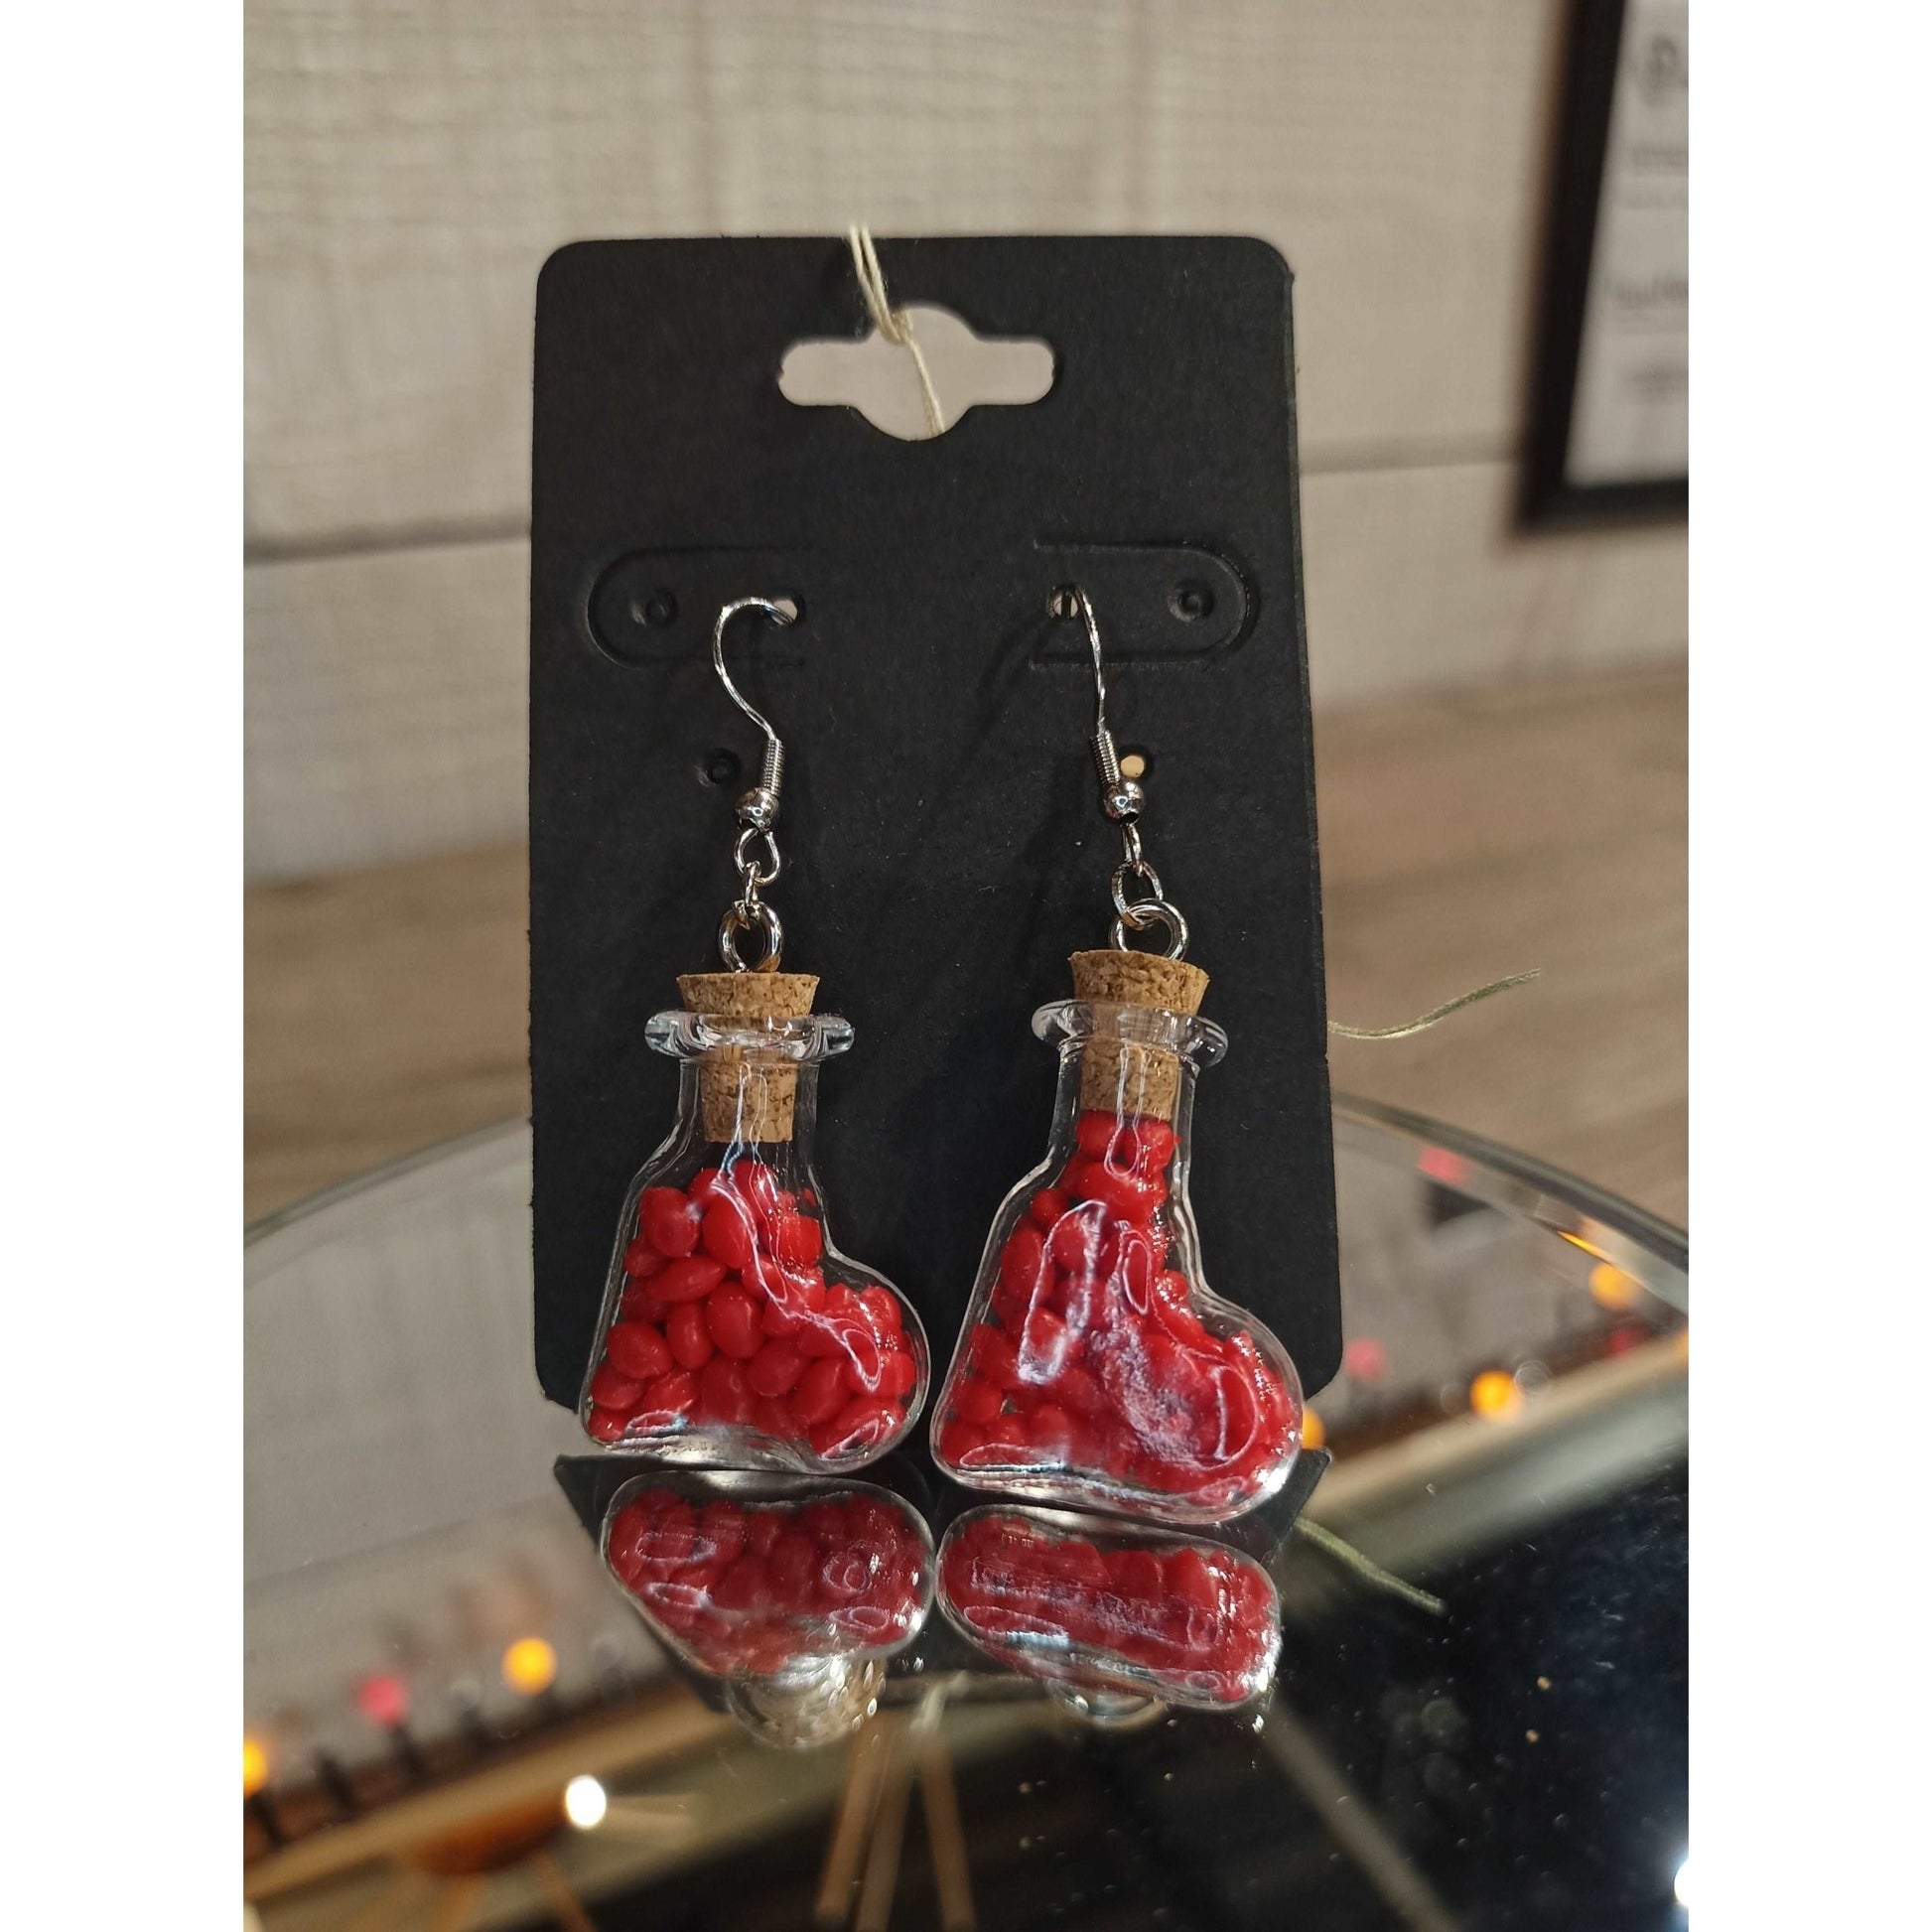 Recycled Potion Earrings | Jewelry | Deviant Kreations - Deviantkreations